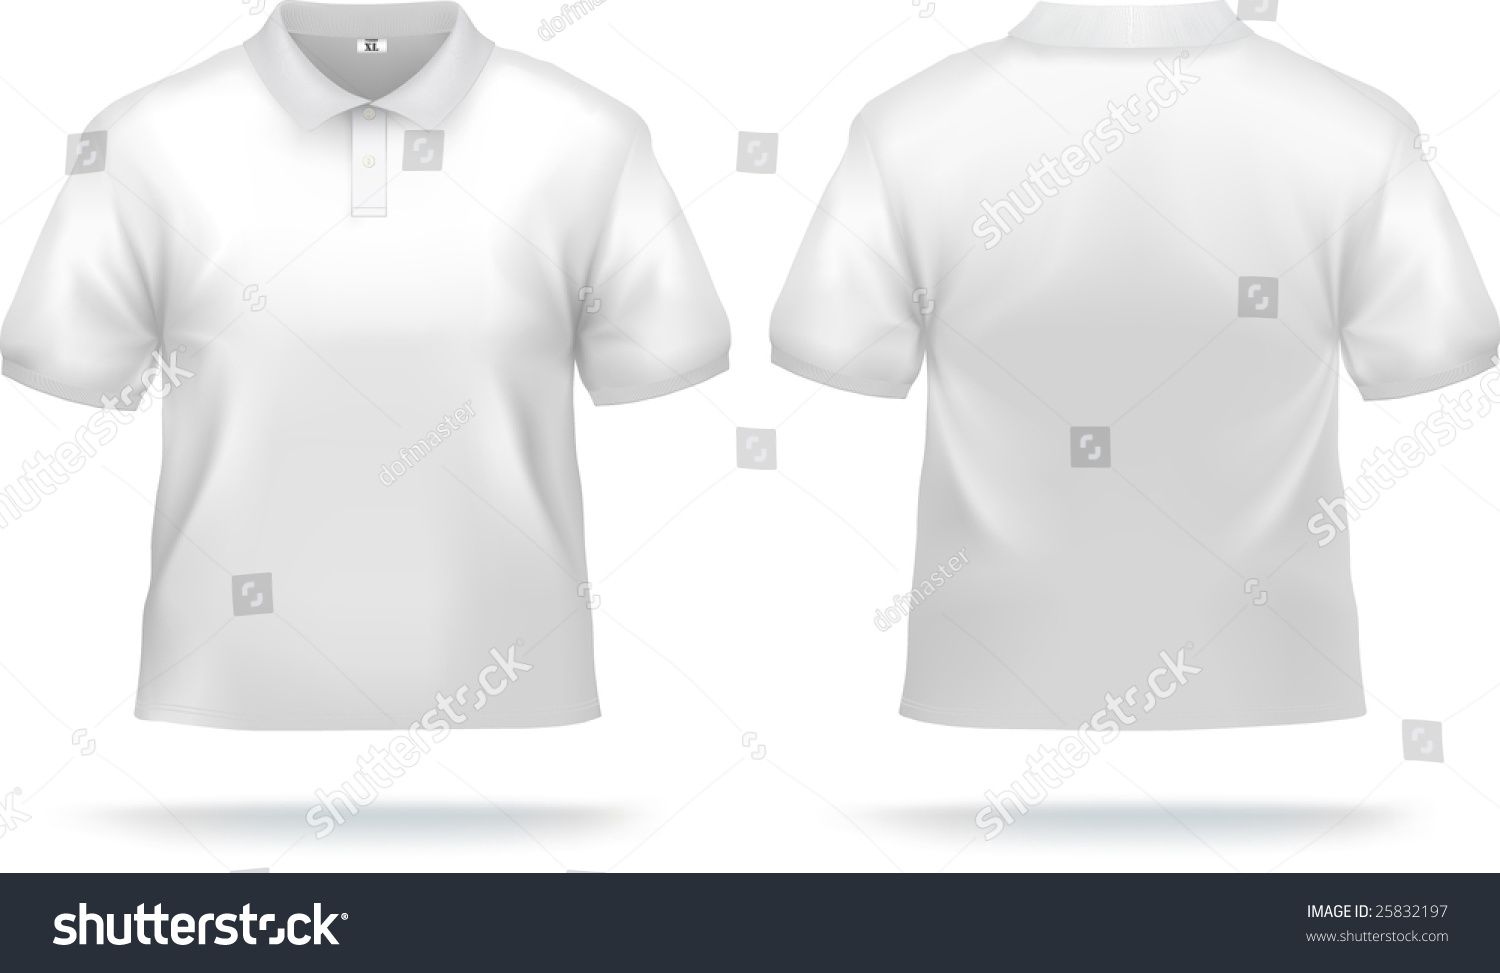 White Polo Shirt Design Template (Front & Back). Contains Gradient Mesh ...